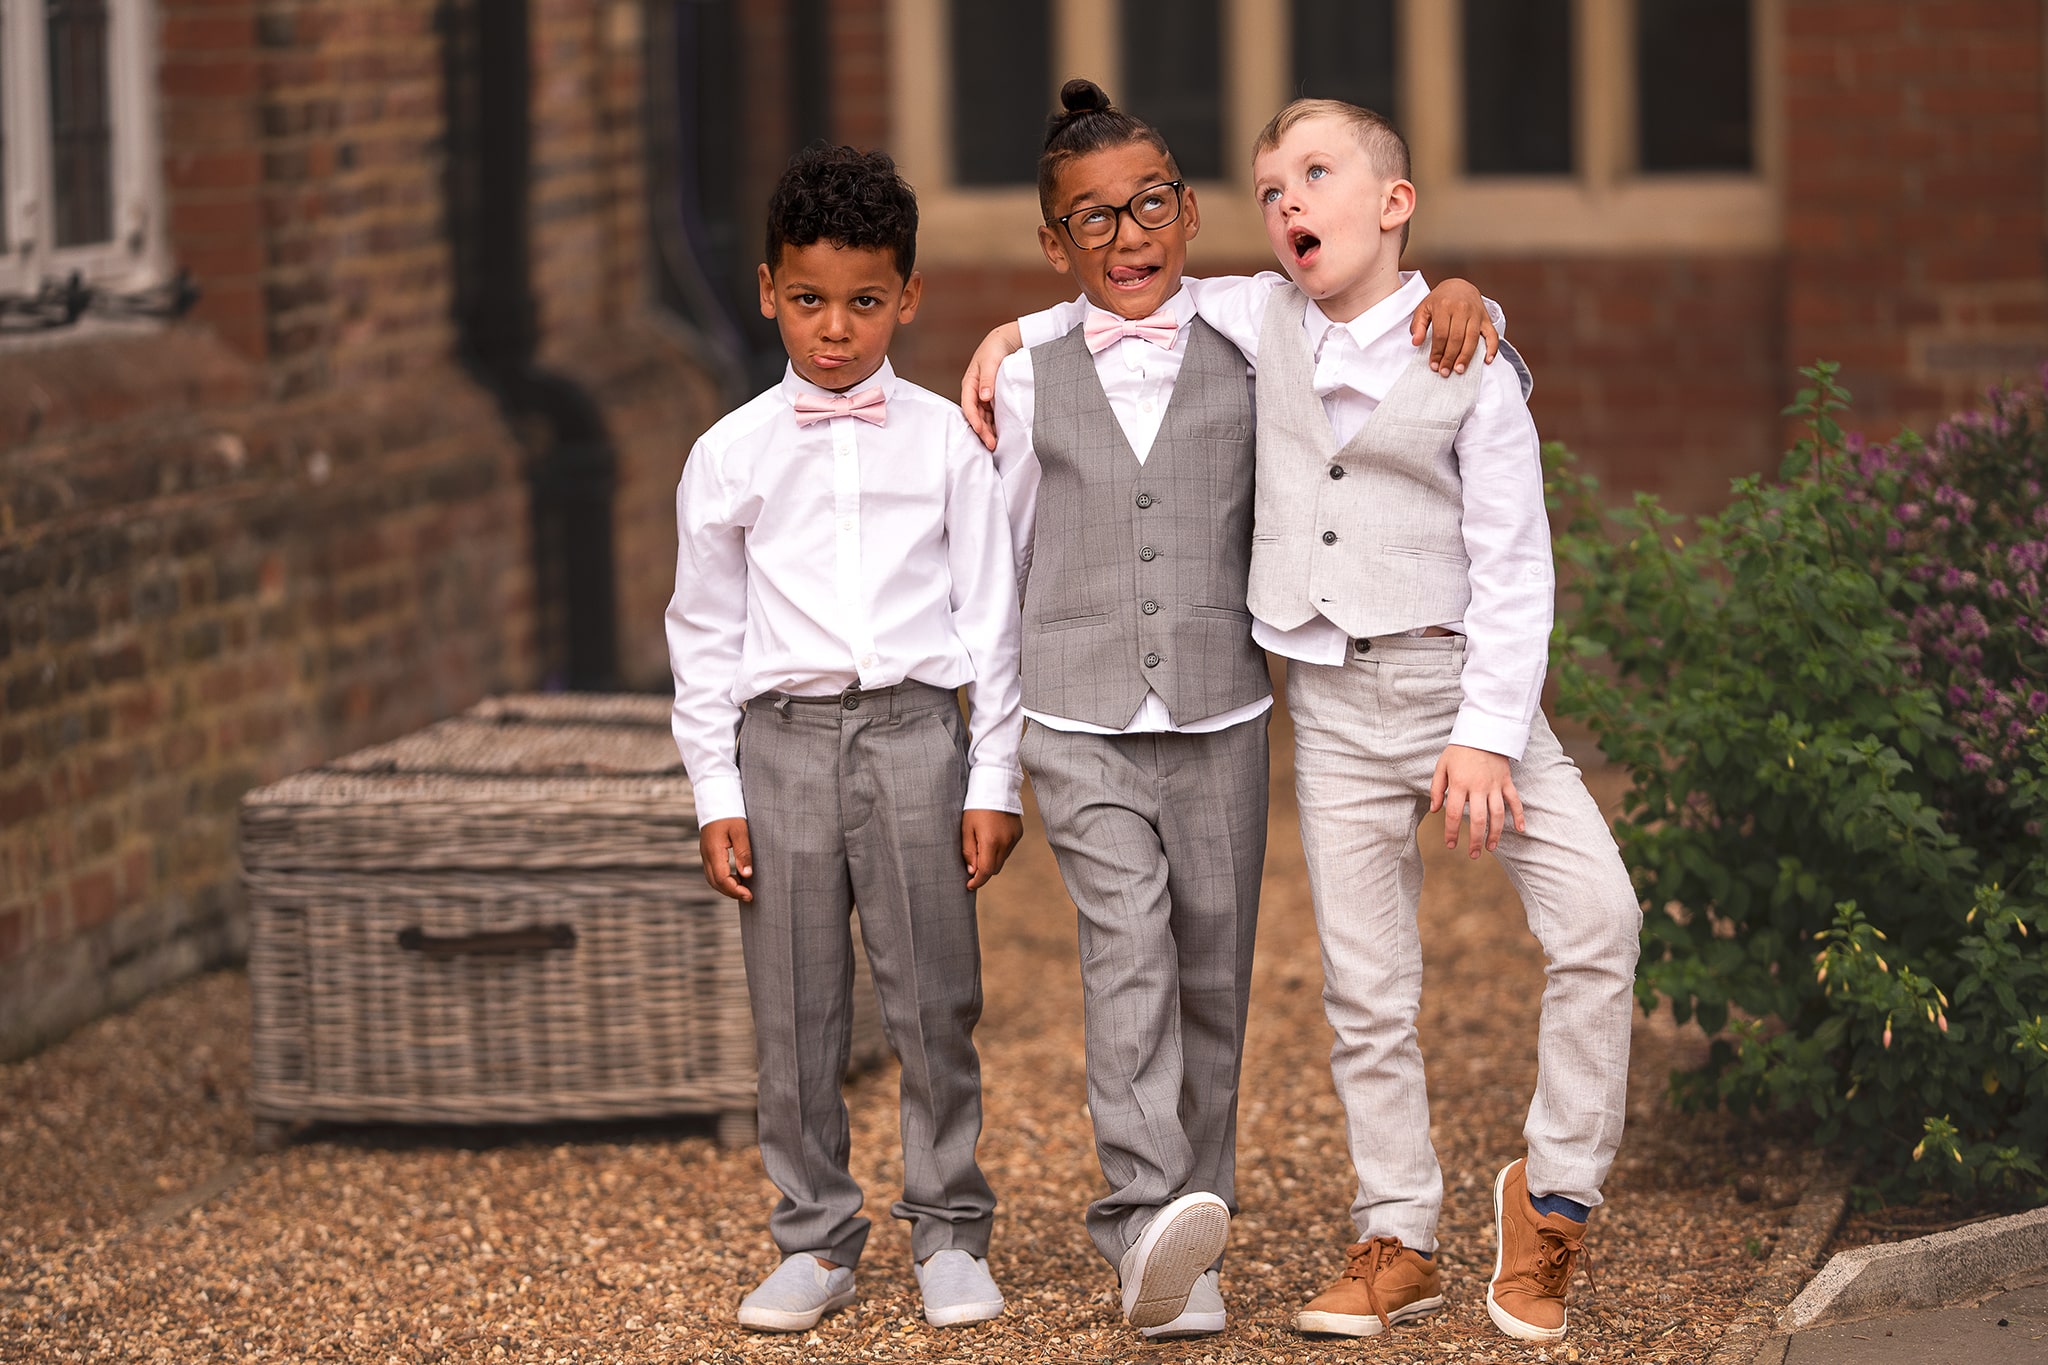 Funny photo of three young boys pulling faces, dressed smartly in wedding suits.